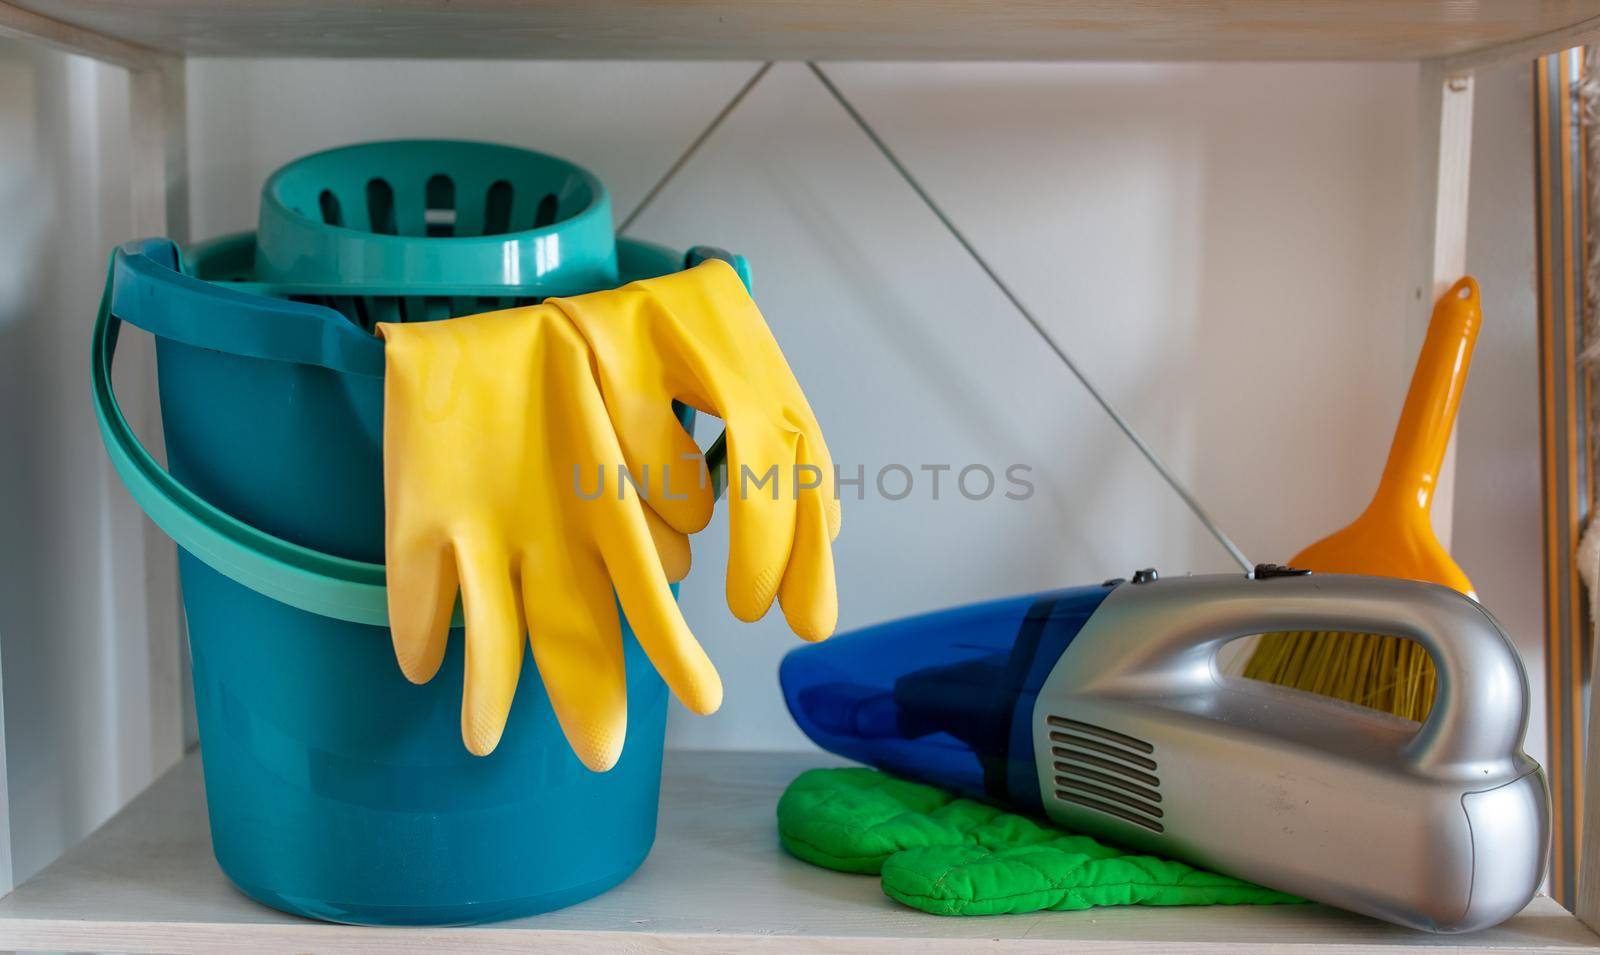 Cleaning tools on shelf by budabar